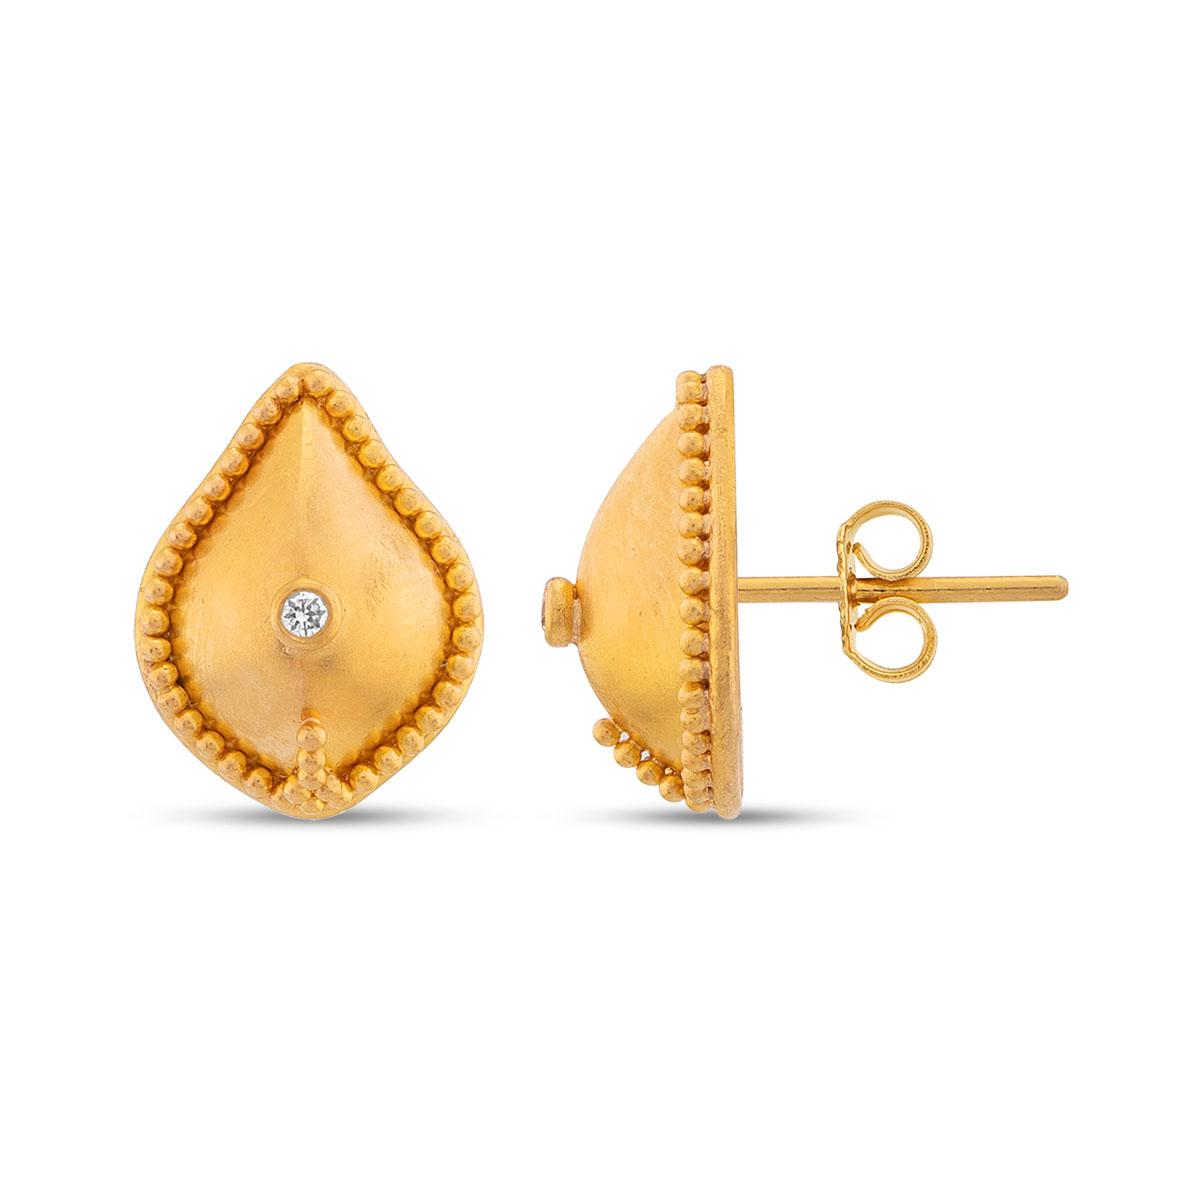 Comma and Granulation Earrings